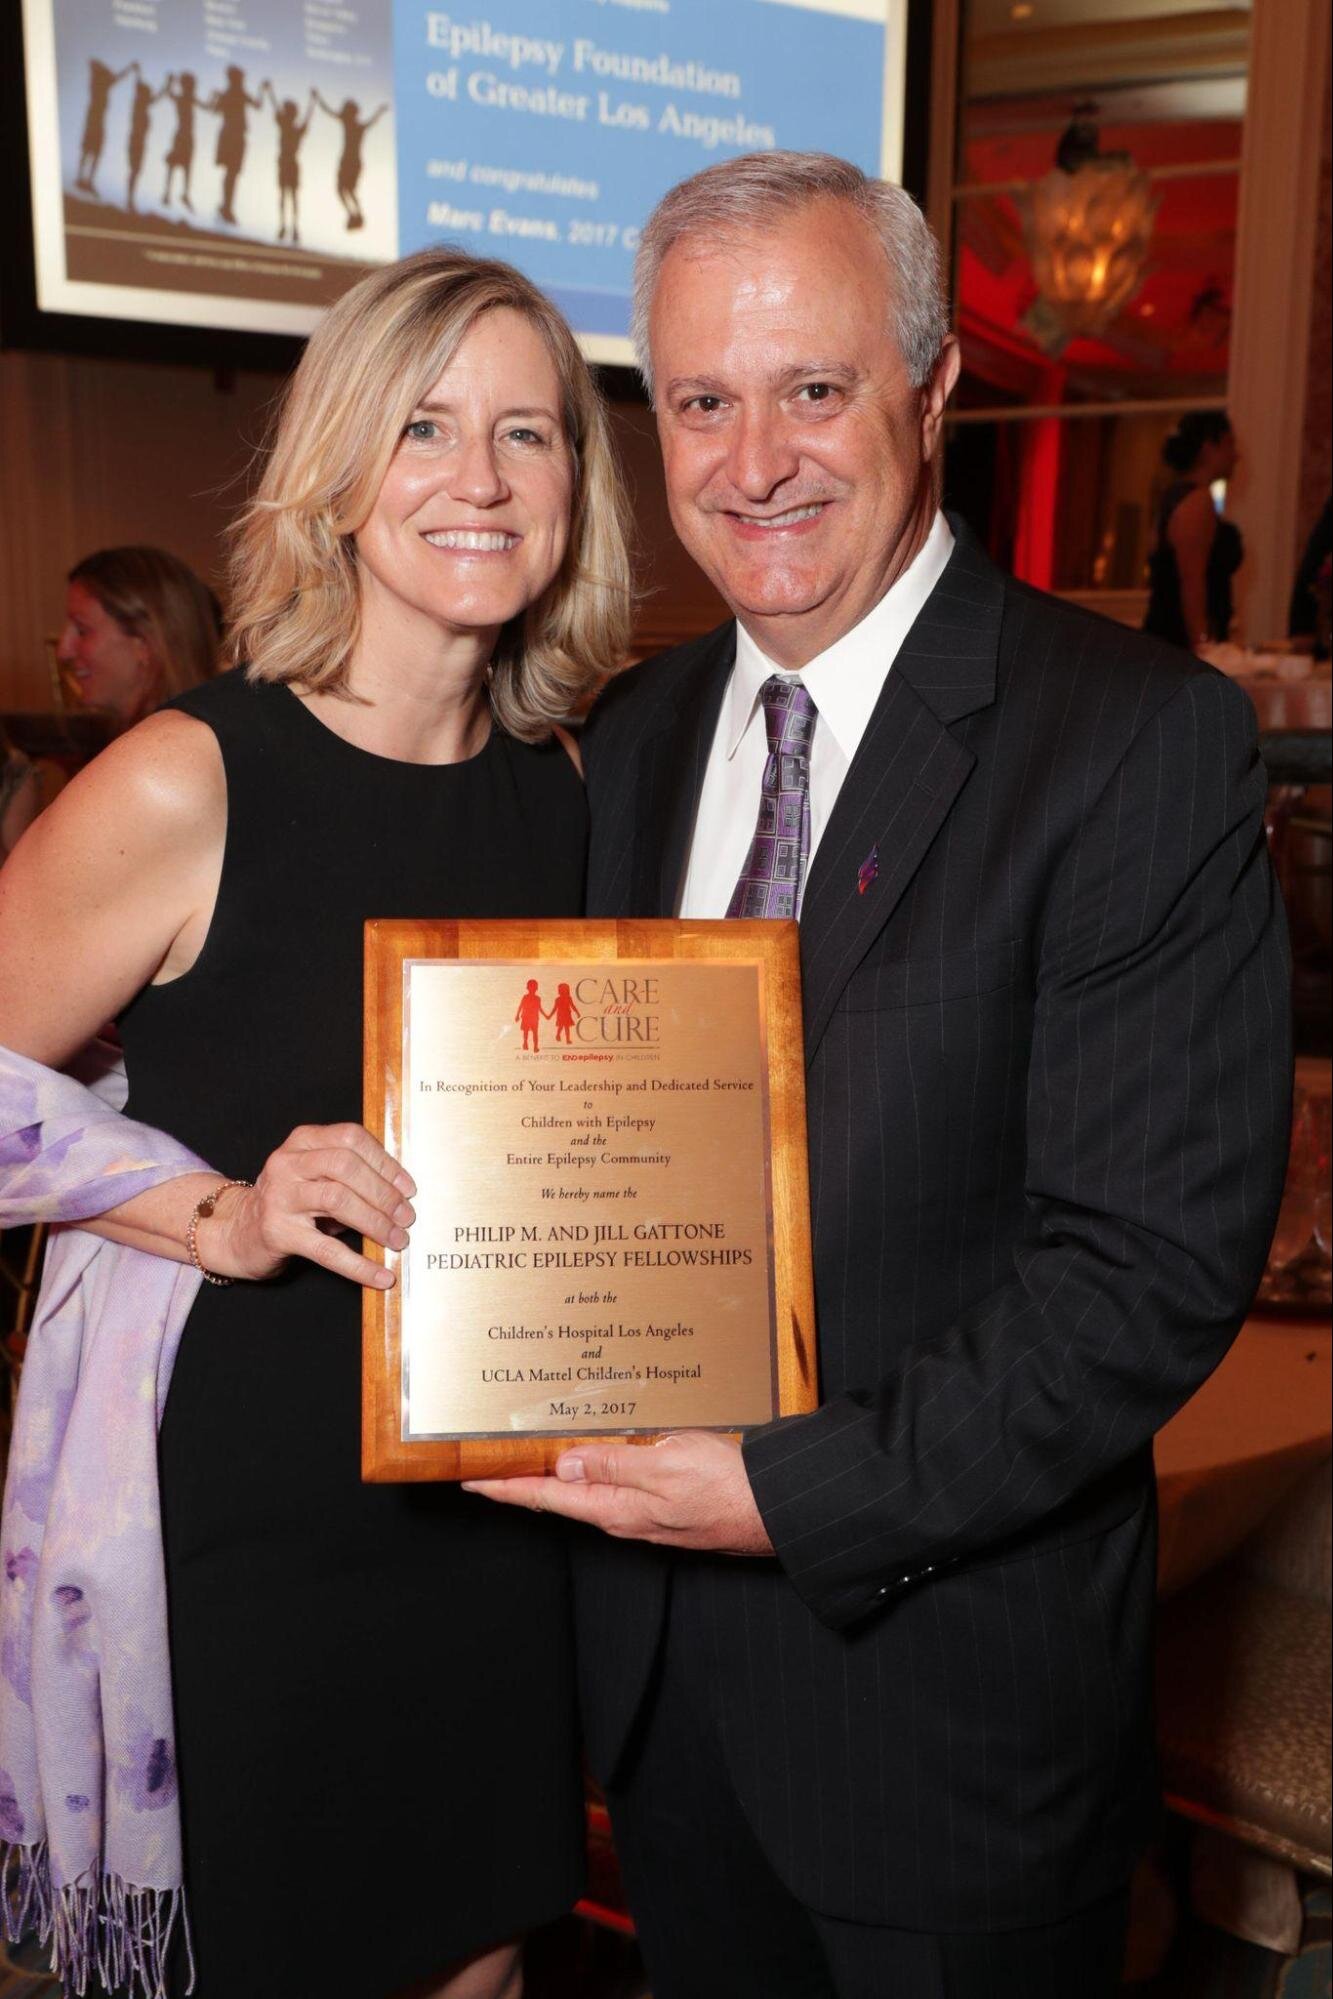  Phil and Jill were presented with the Epilepsy Foundation’s Care and Cure Pediatric Epilepsy Fellowship Award for their lifetime of leadership and dedication to improve the lives of children with epilepsy. 